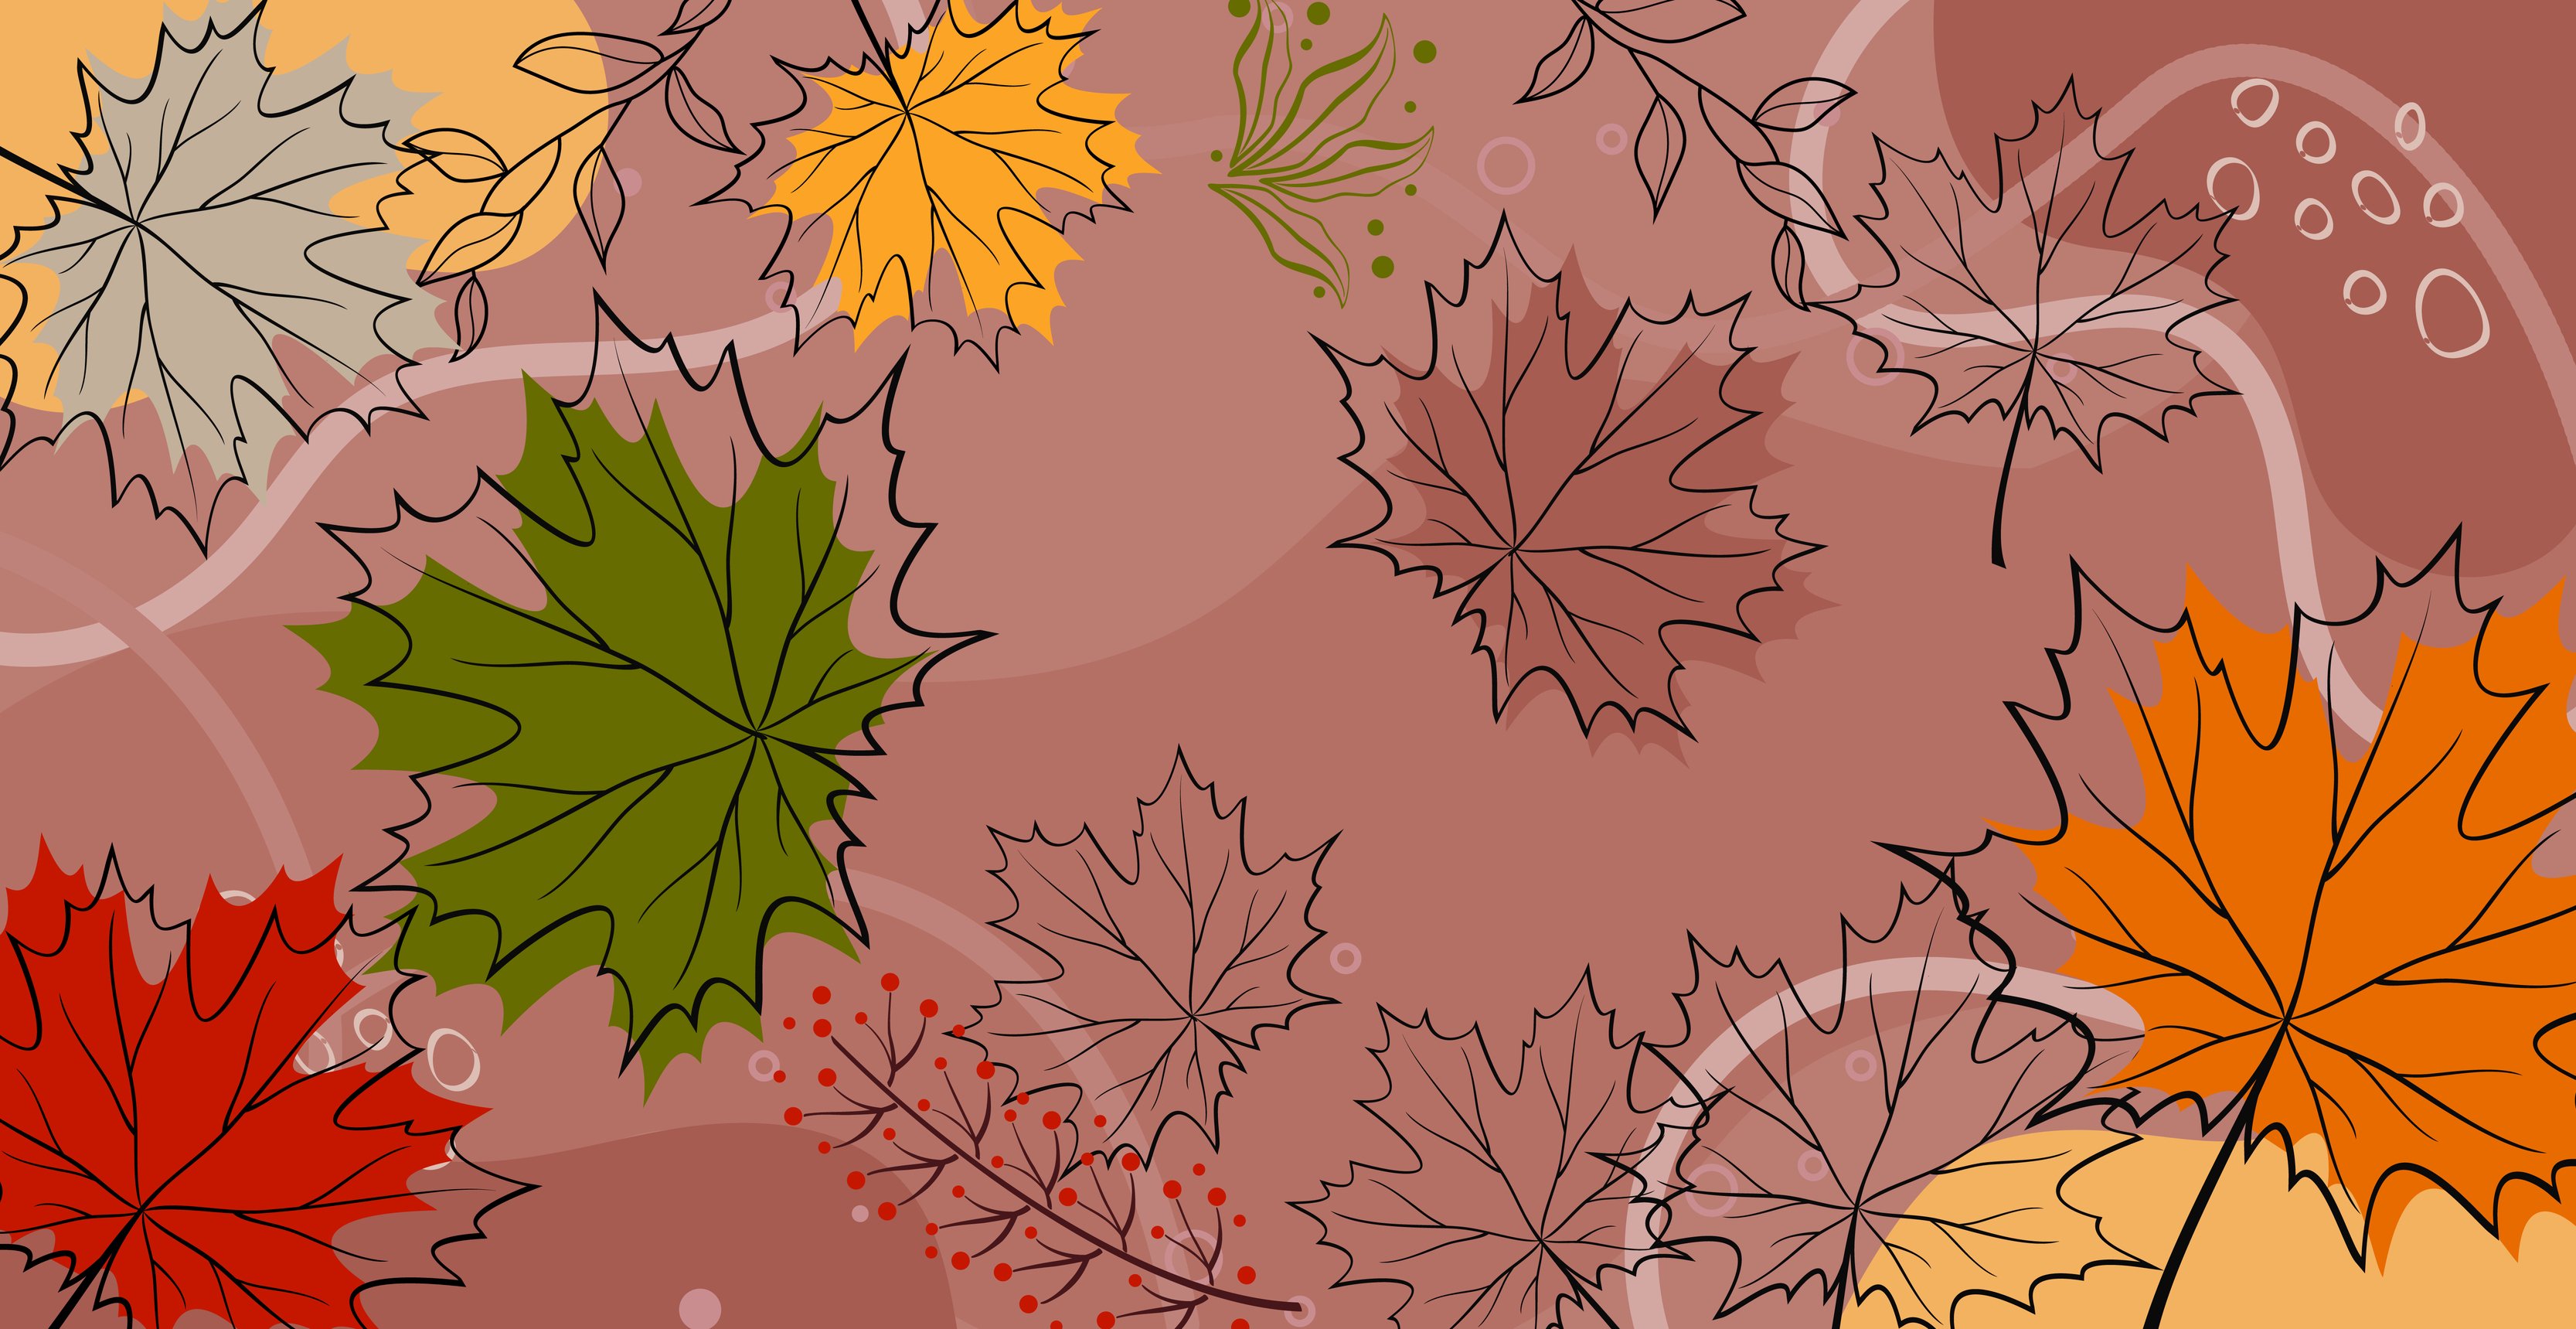 Autumn maple leaves on a colored background